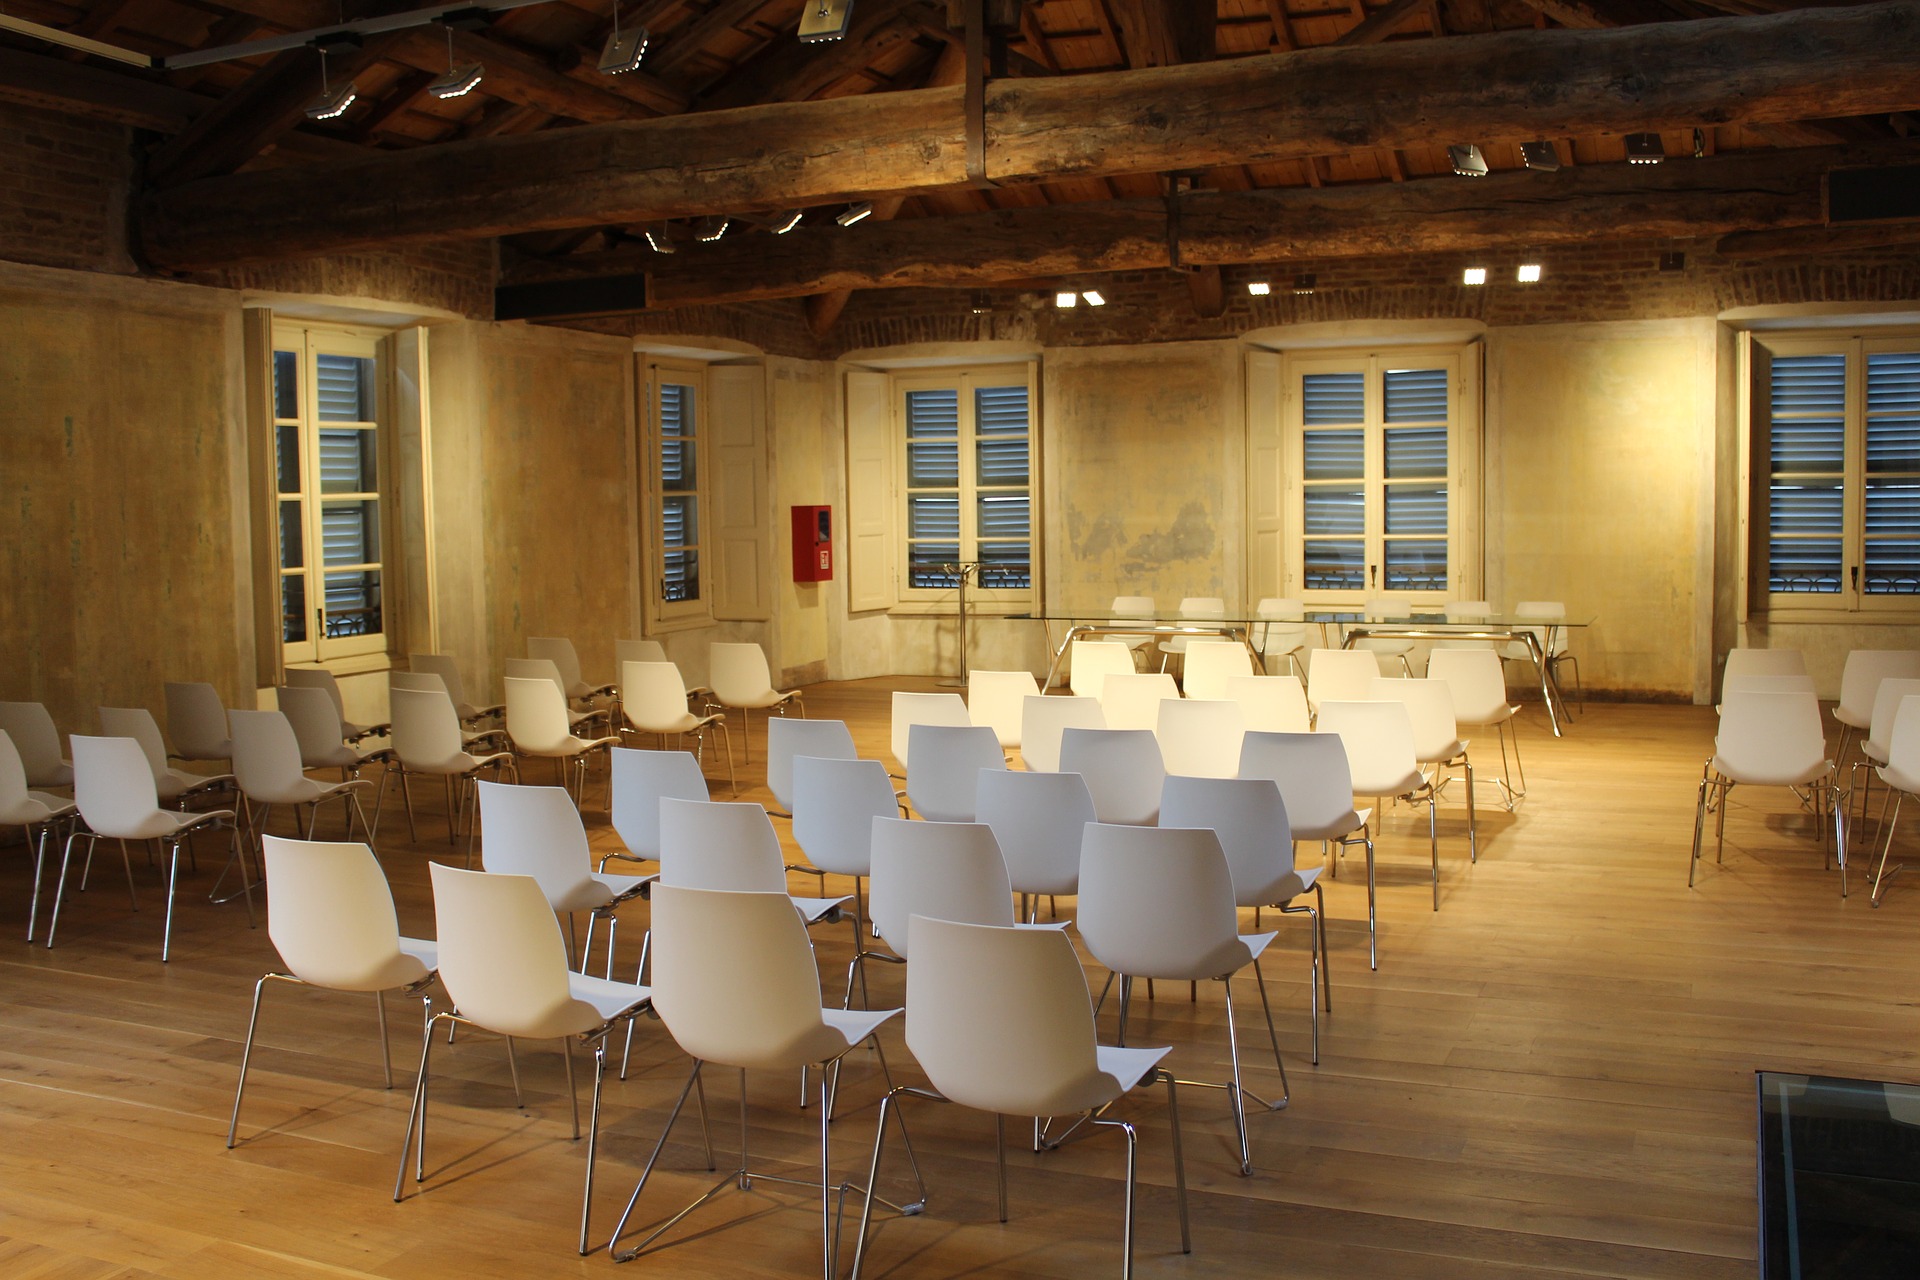 A room with many white chairs and wooden floors